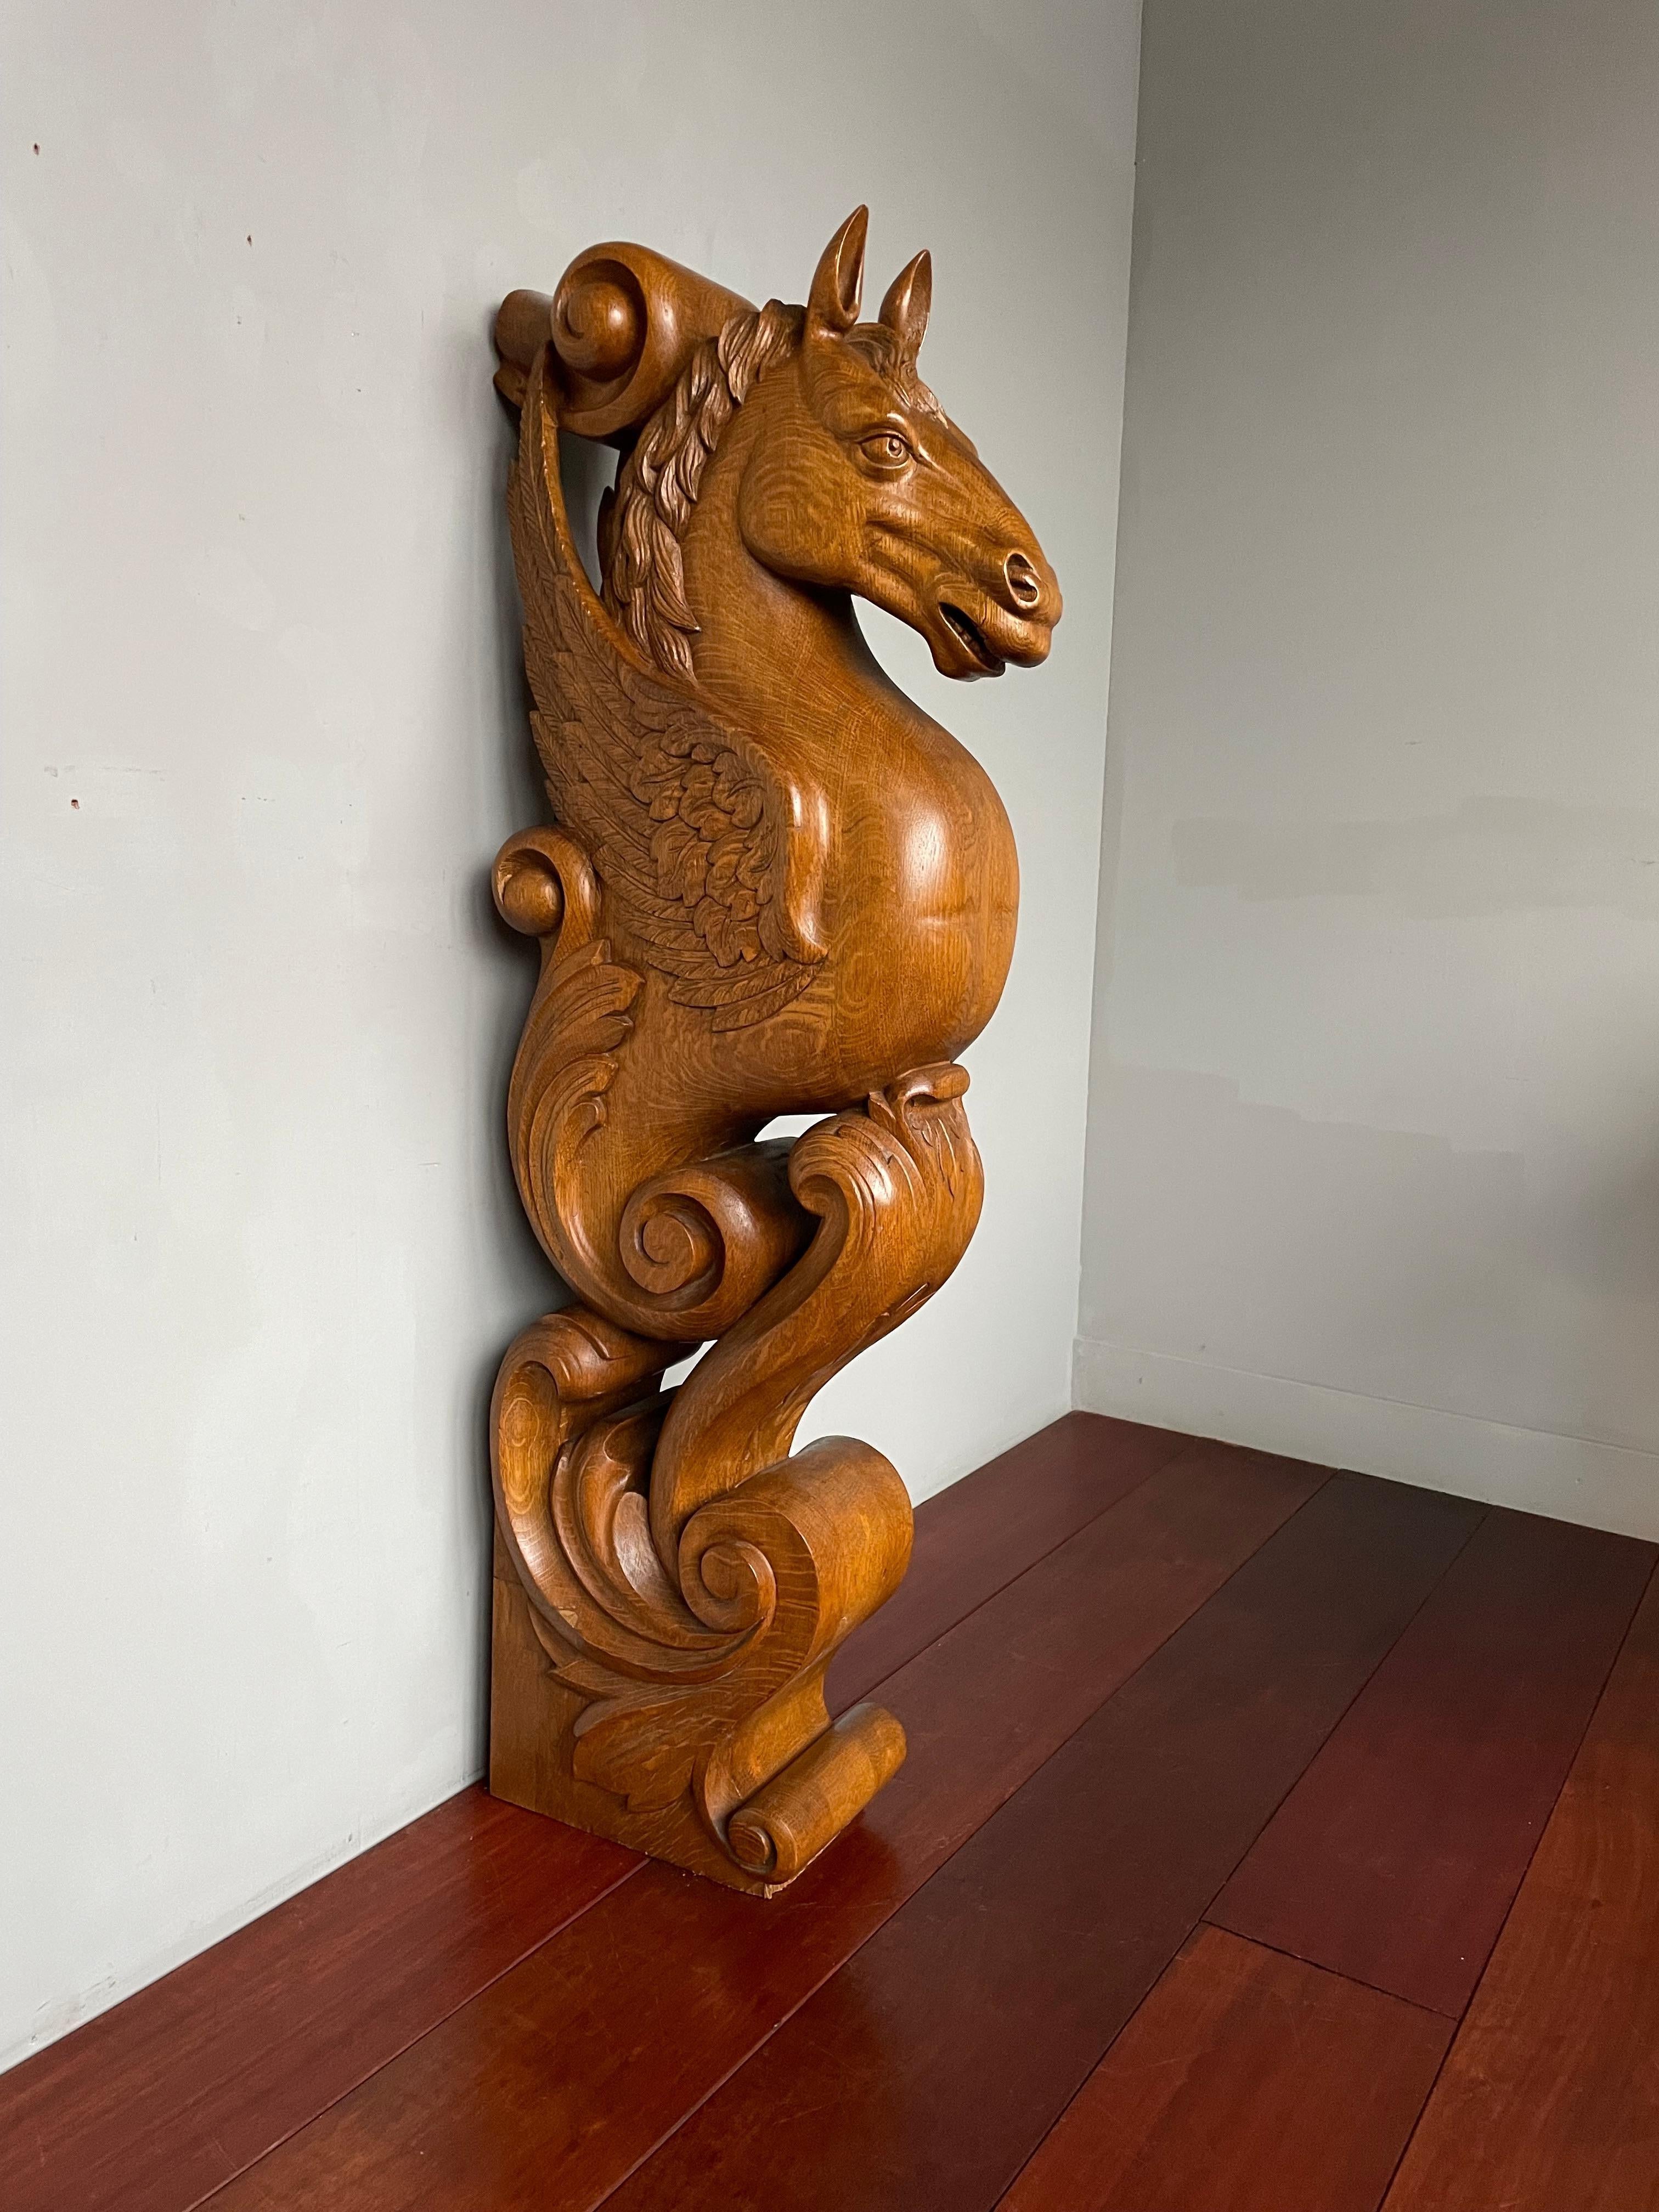 Greek Revival Awesome Hand Carved Oak Pegasus Winged Horse Sculpture Newel Post / Stair Rail For Sale